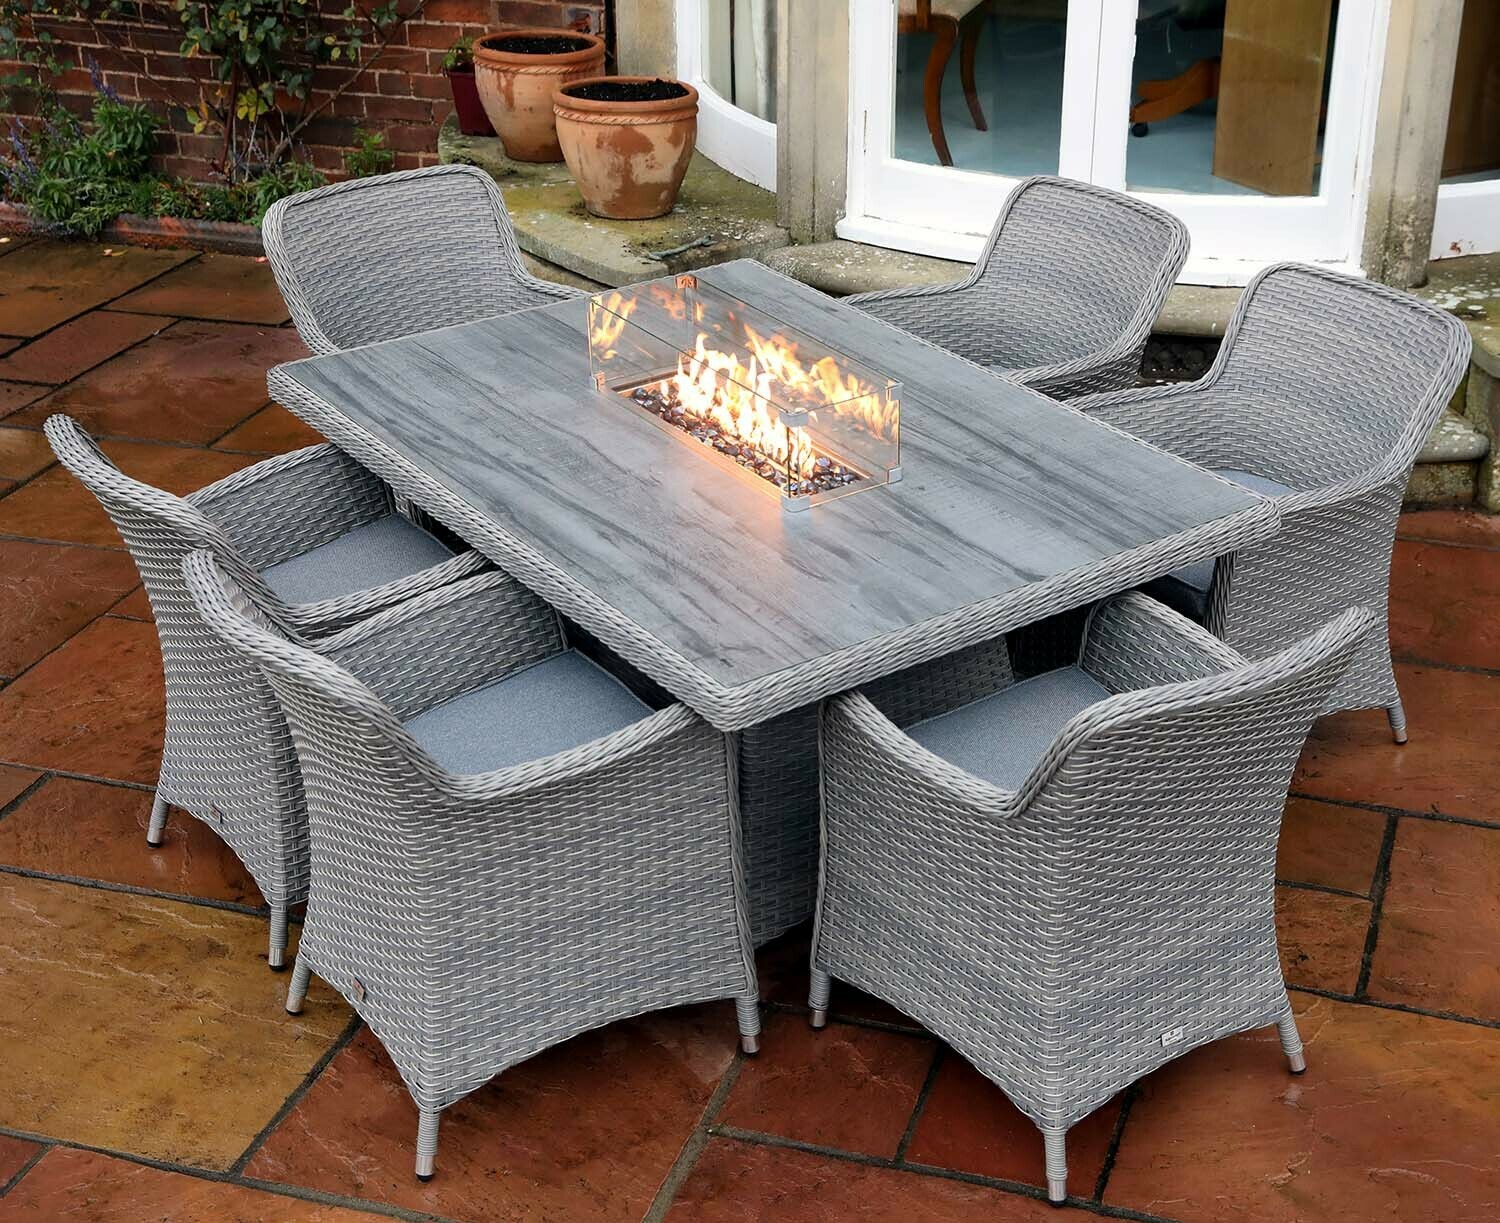 CATALAN SIX SEAT FIREPIT SET WAS £2095 NOW £1695